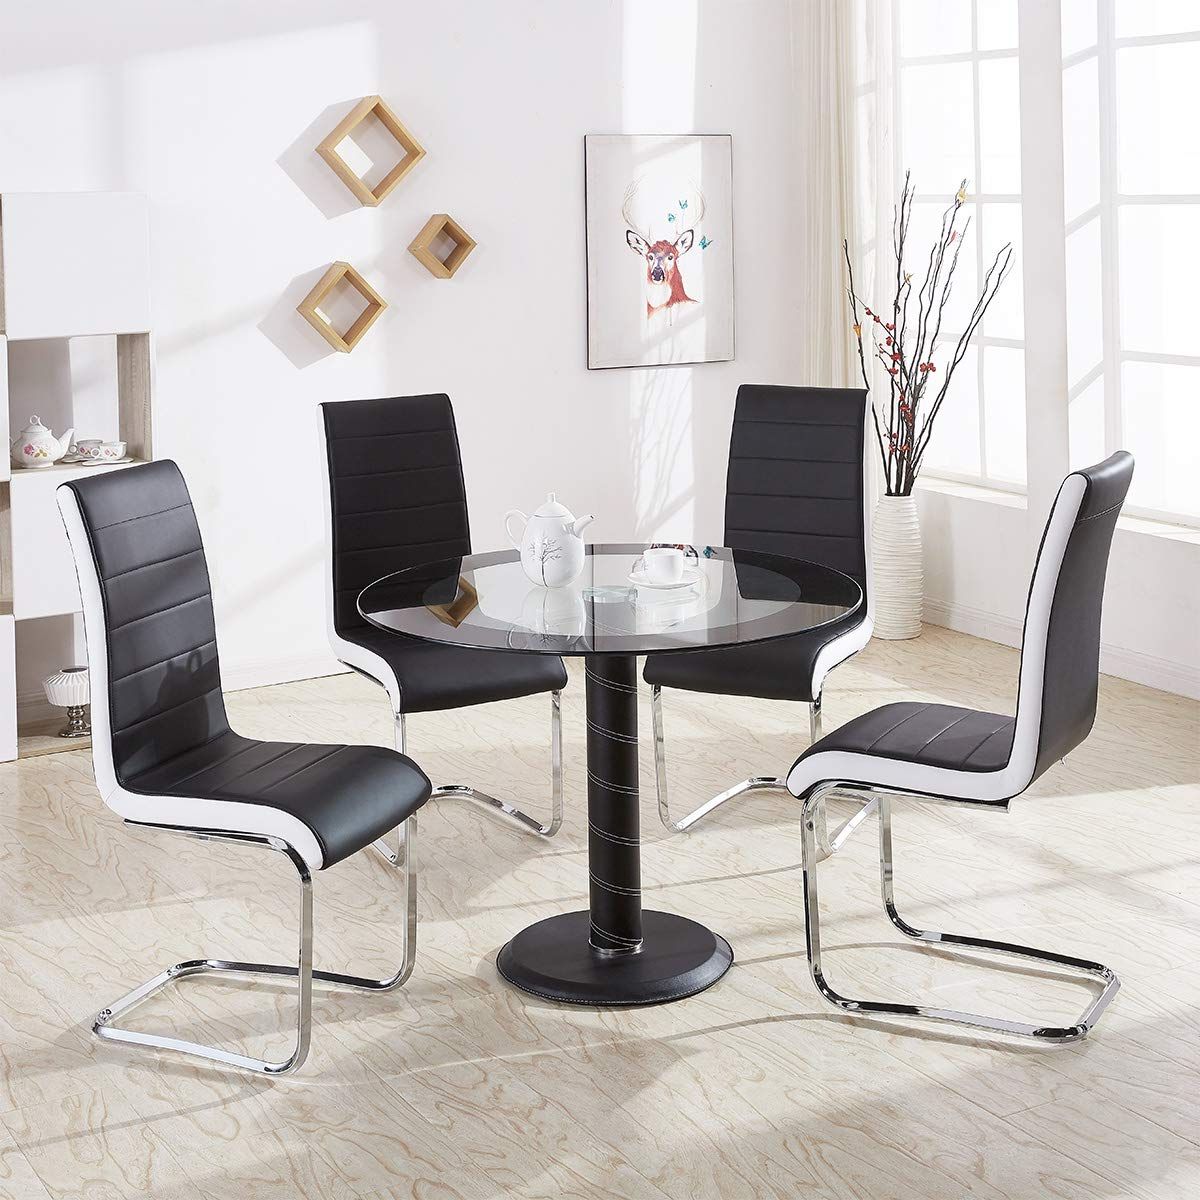 Latest Rae Round Pedestal Dining Tables Intended For Gizza Tempered Glass Pedestal Table And 4 Dining Chairs Round Marble Base  Metal Chrome Faux Leather Modern Kitchen Room Lunch Break Dining Table Set (View 11 of 25)